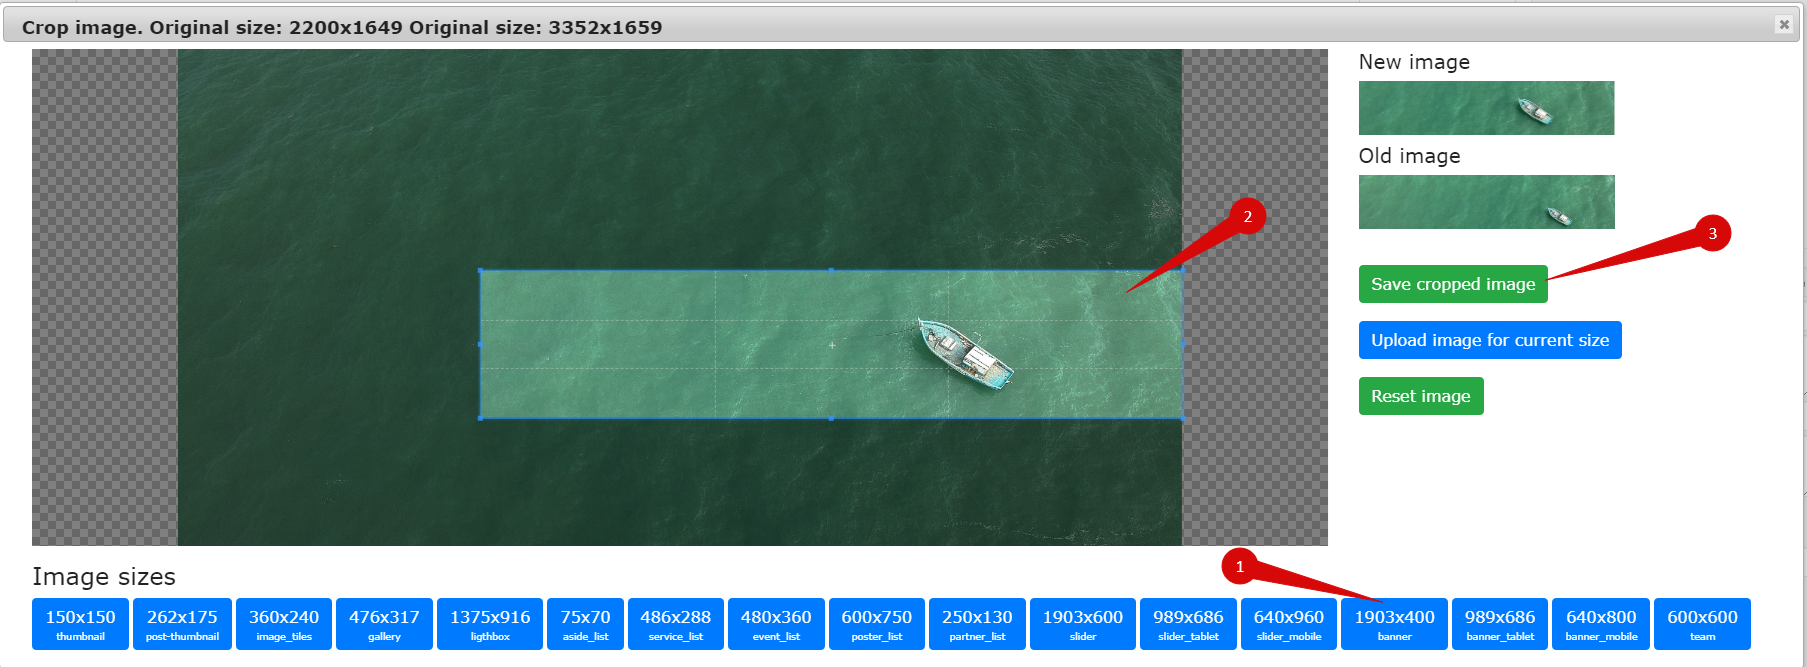 With our yummy plugin you can select custom cropping range for desktop size.